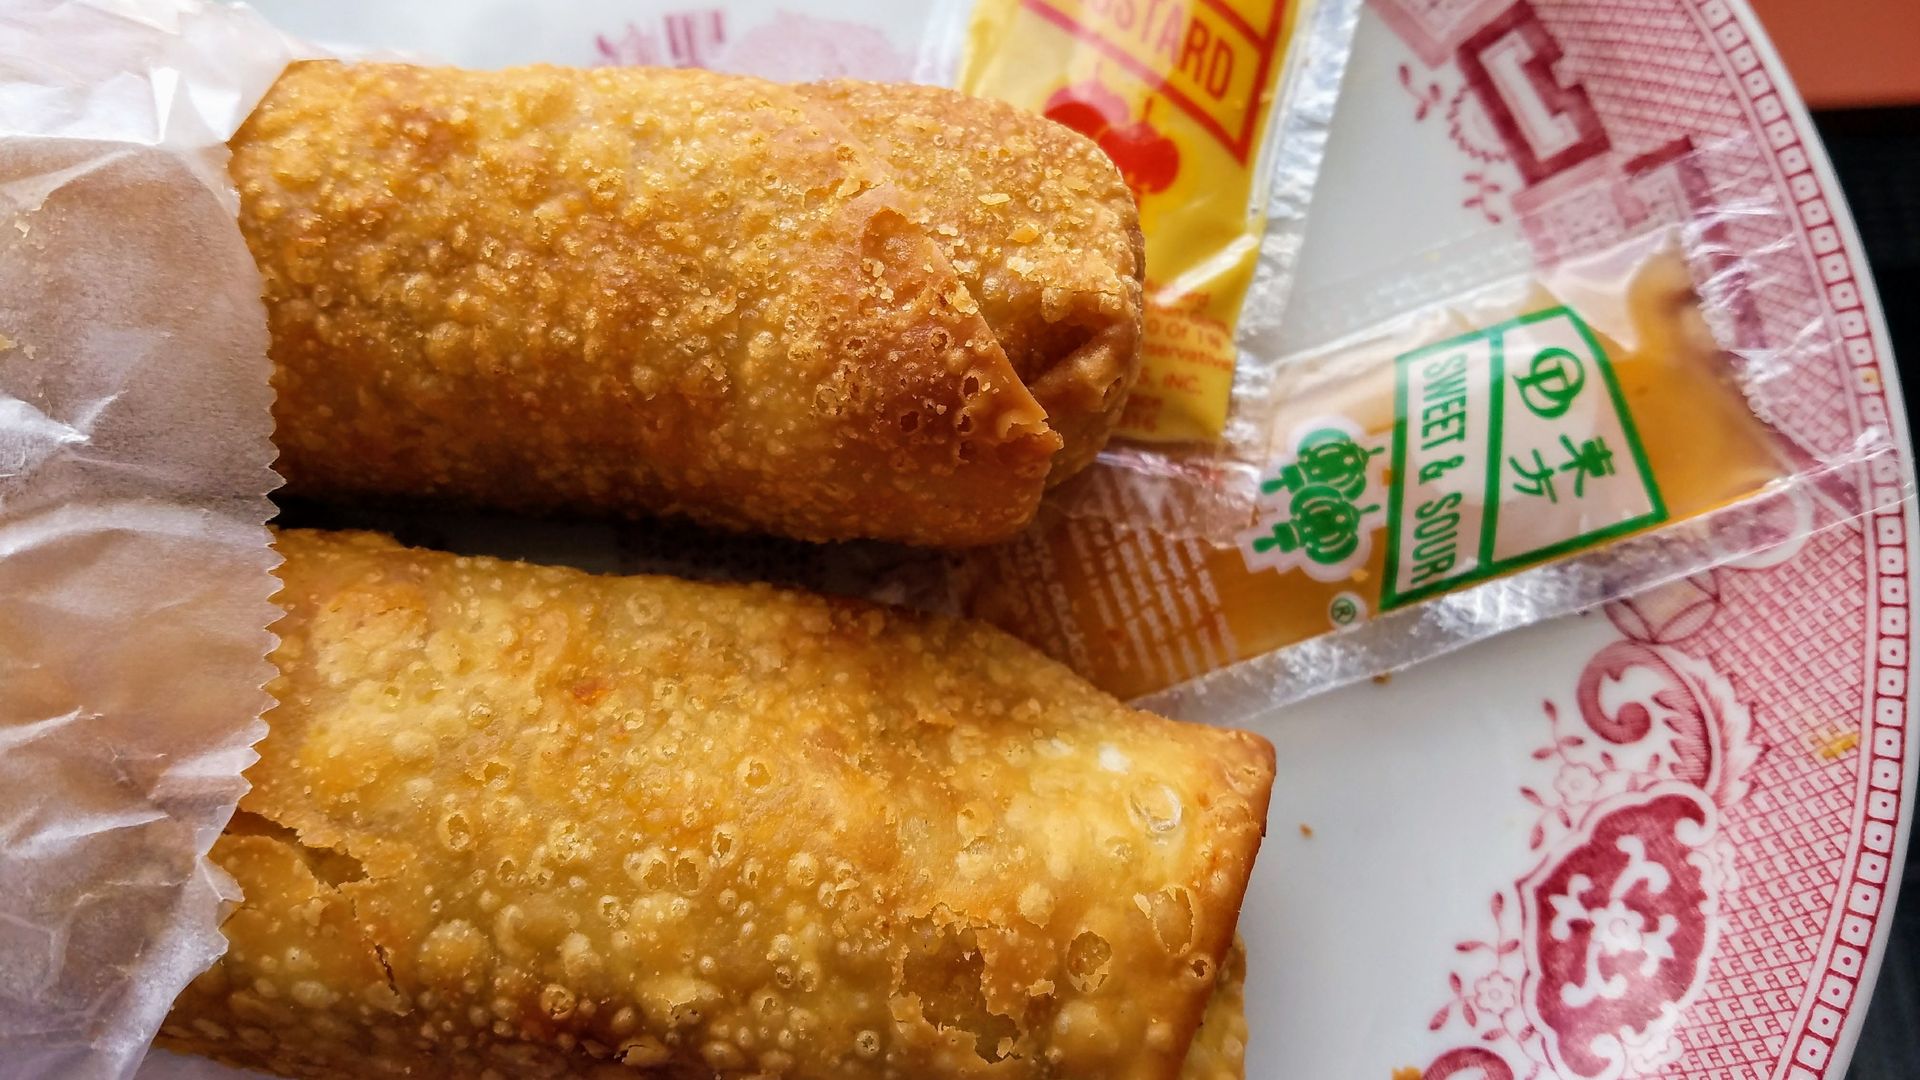 Photo of two egg rolls on a paper plate with a packet of mustard. 